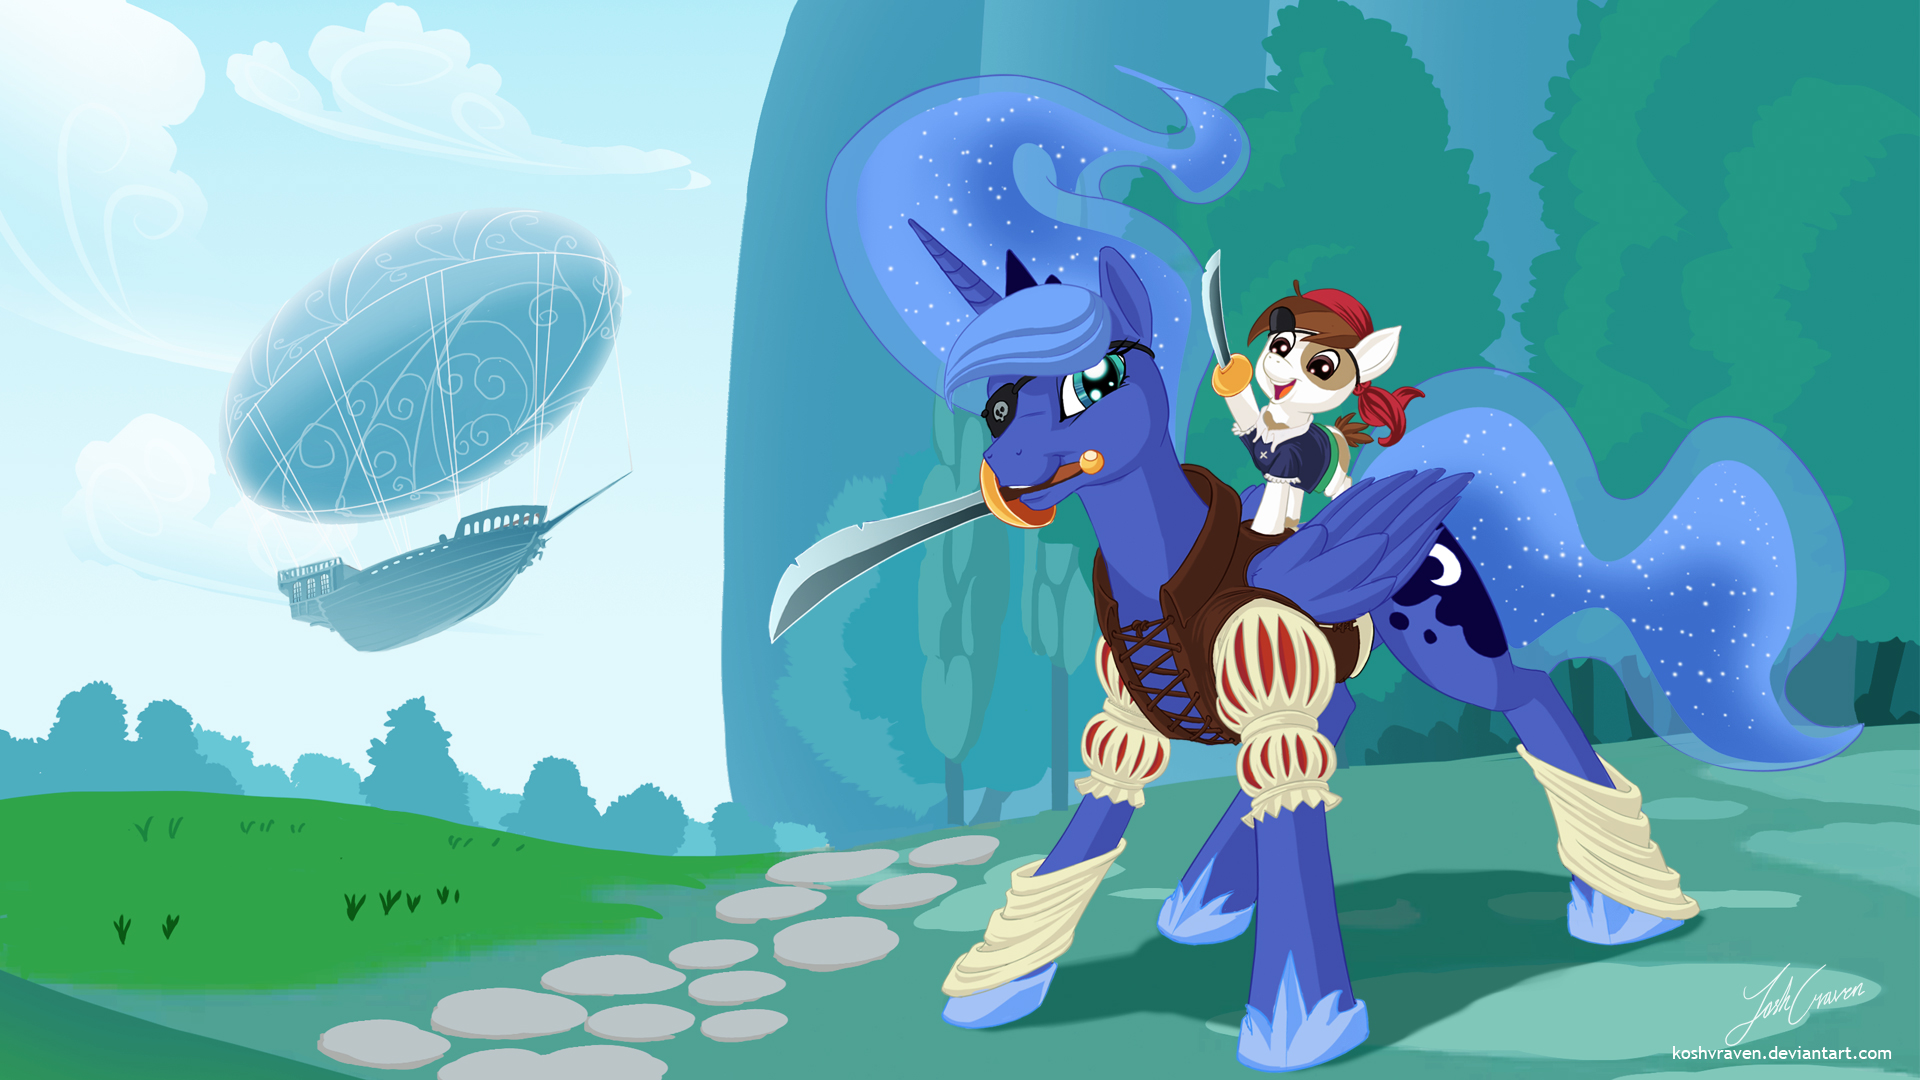 Pip and Luna: Royal Privateers by JoshCraven